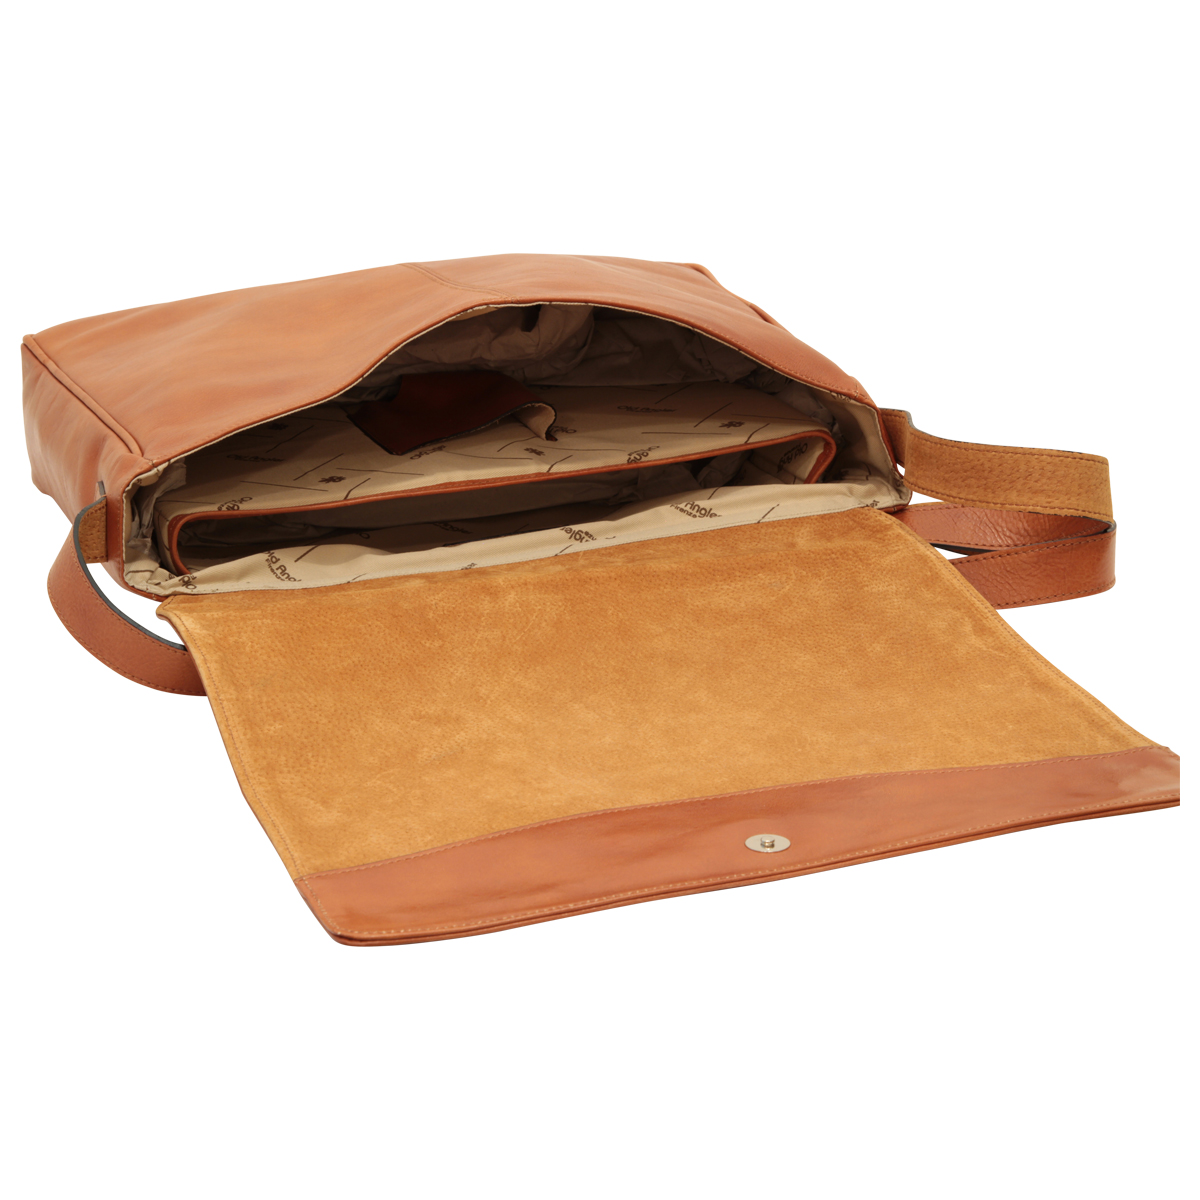 Cowhide Leather Messenger Bag - Colonial | 213189CO US | Old Angler Firenze